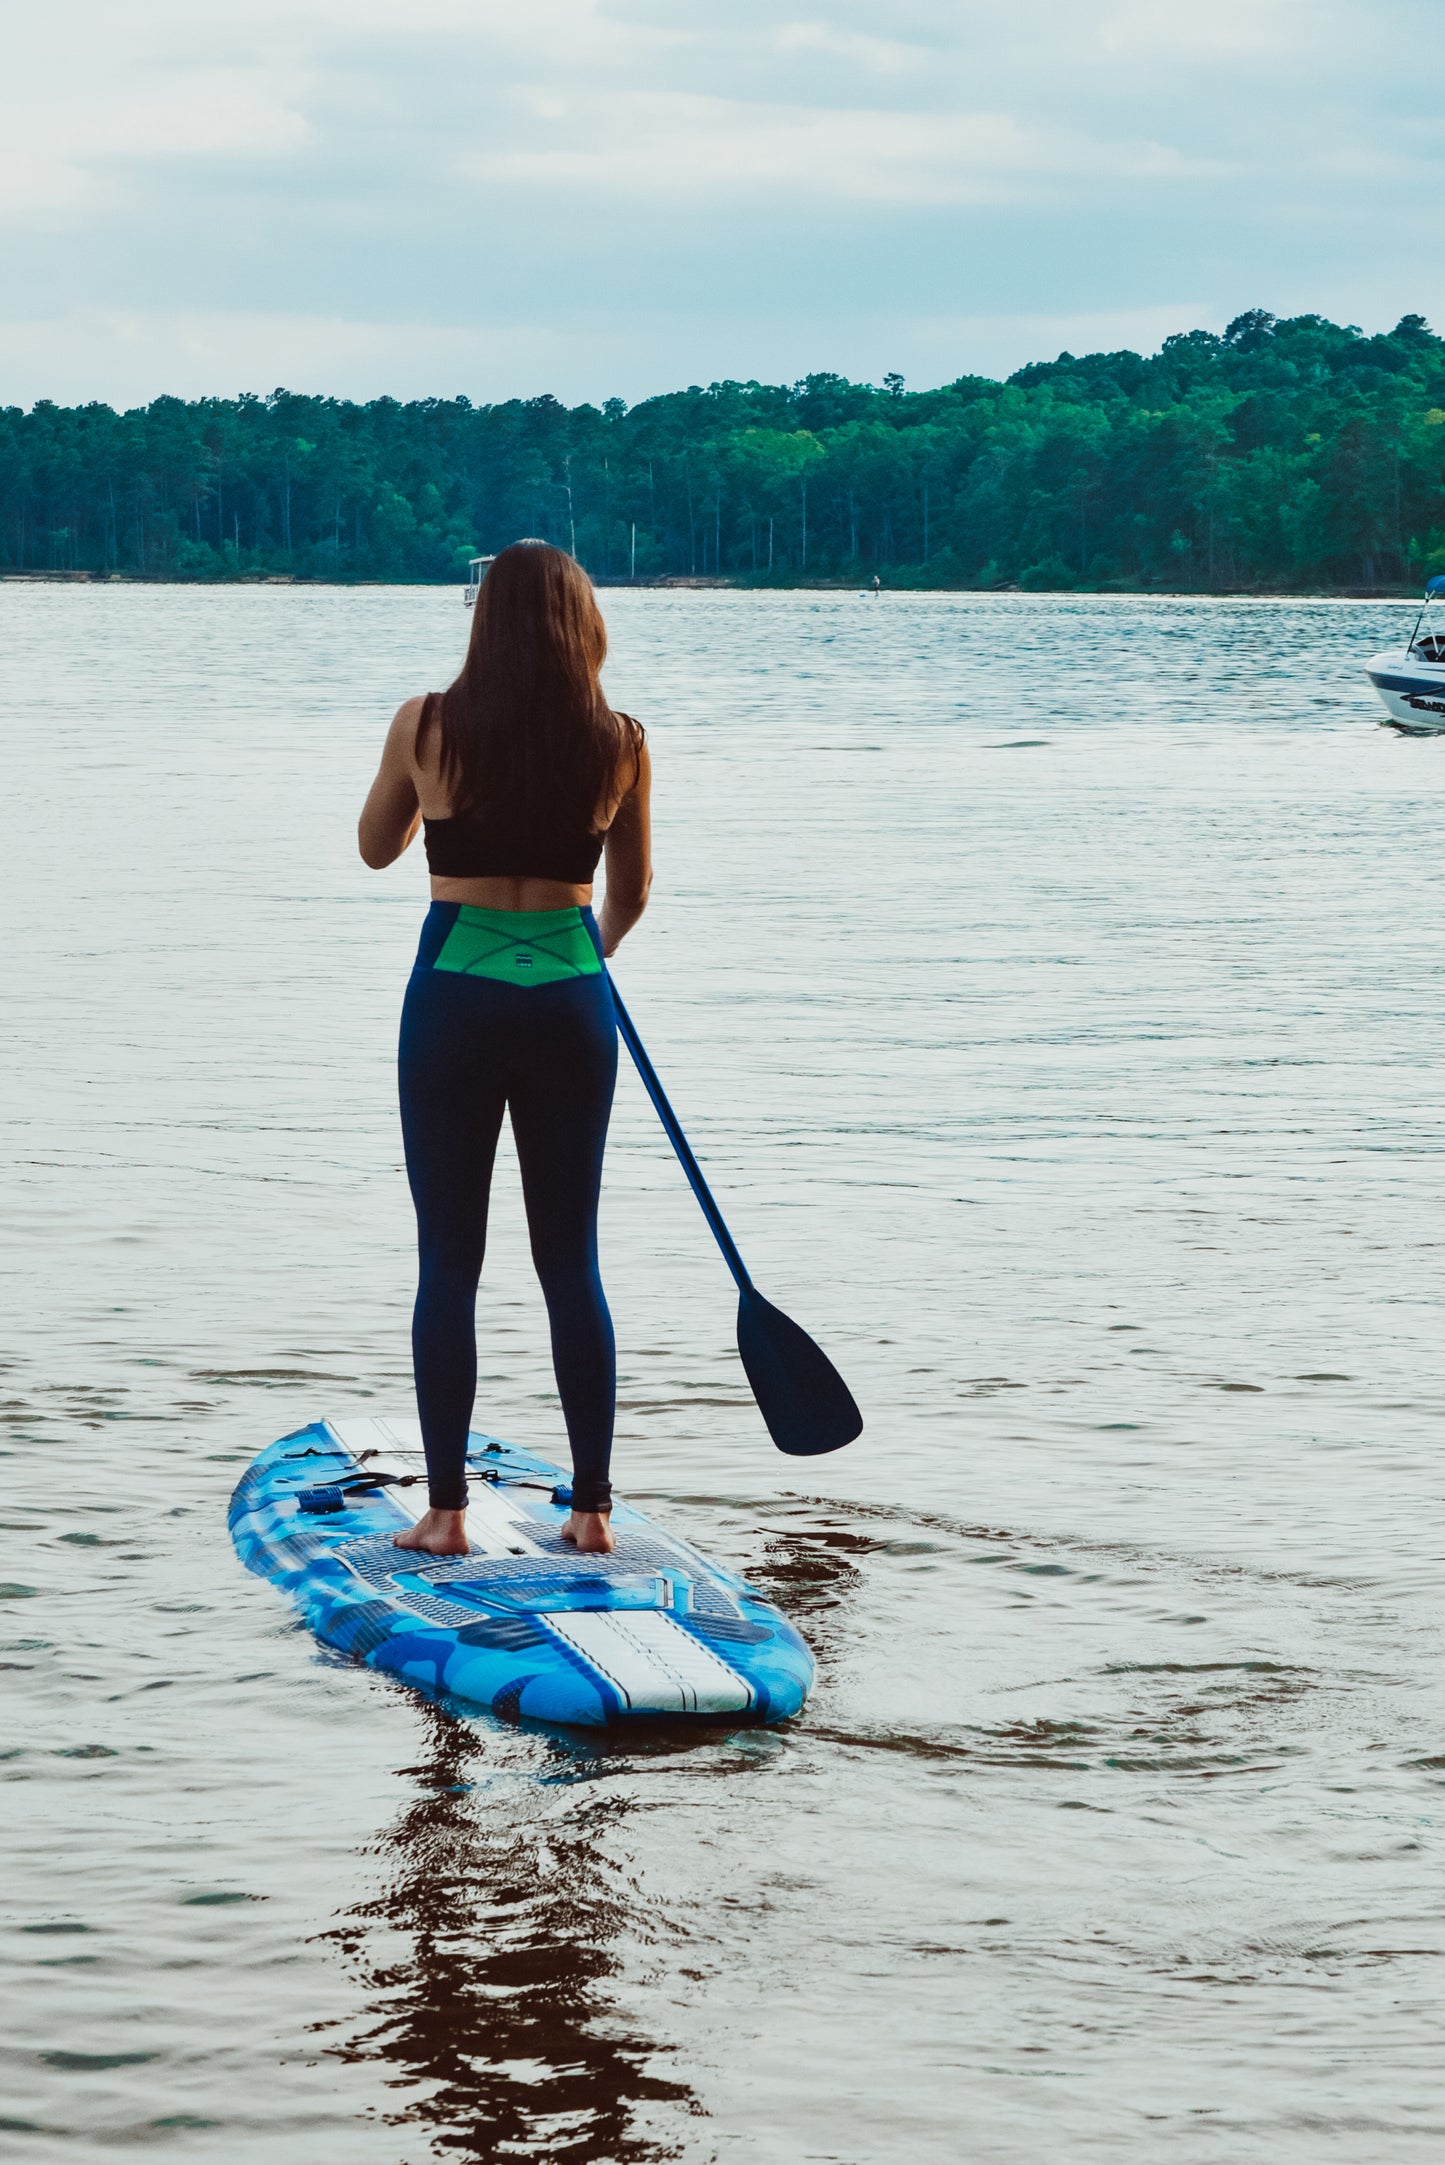 Jala Clothing's Stand Up Paddleboarding Legging in fun prints is